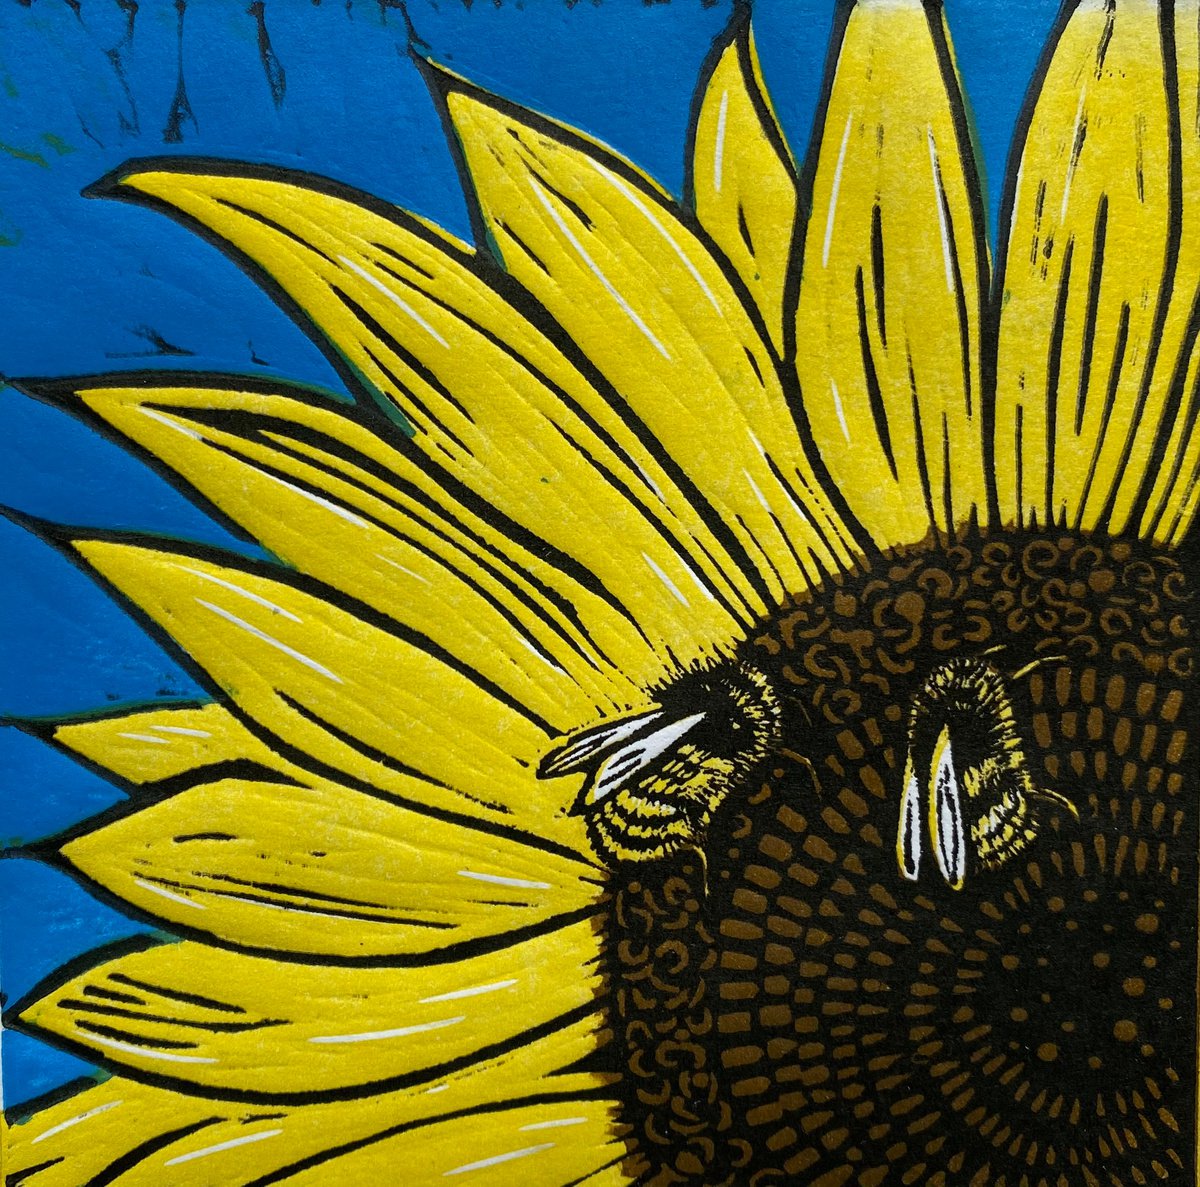 Limited edition handmade Linocut. Sunflower with Bees. 3 of 75 by Jane Dignum